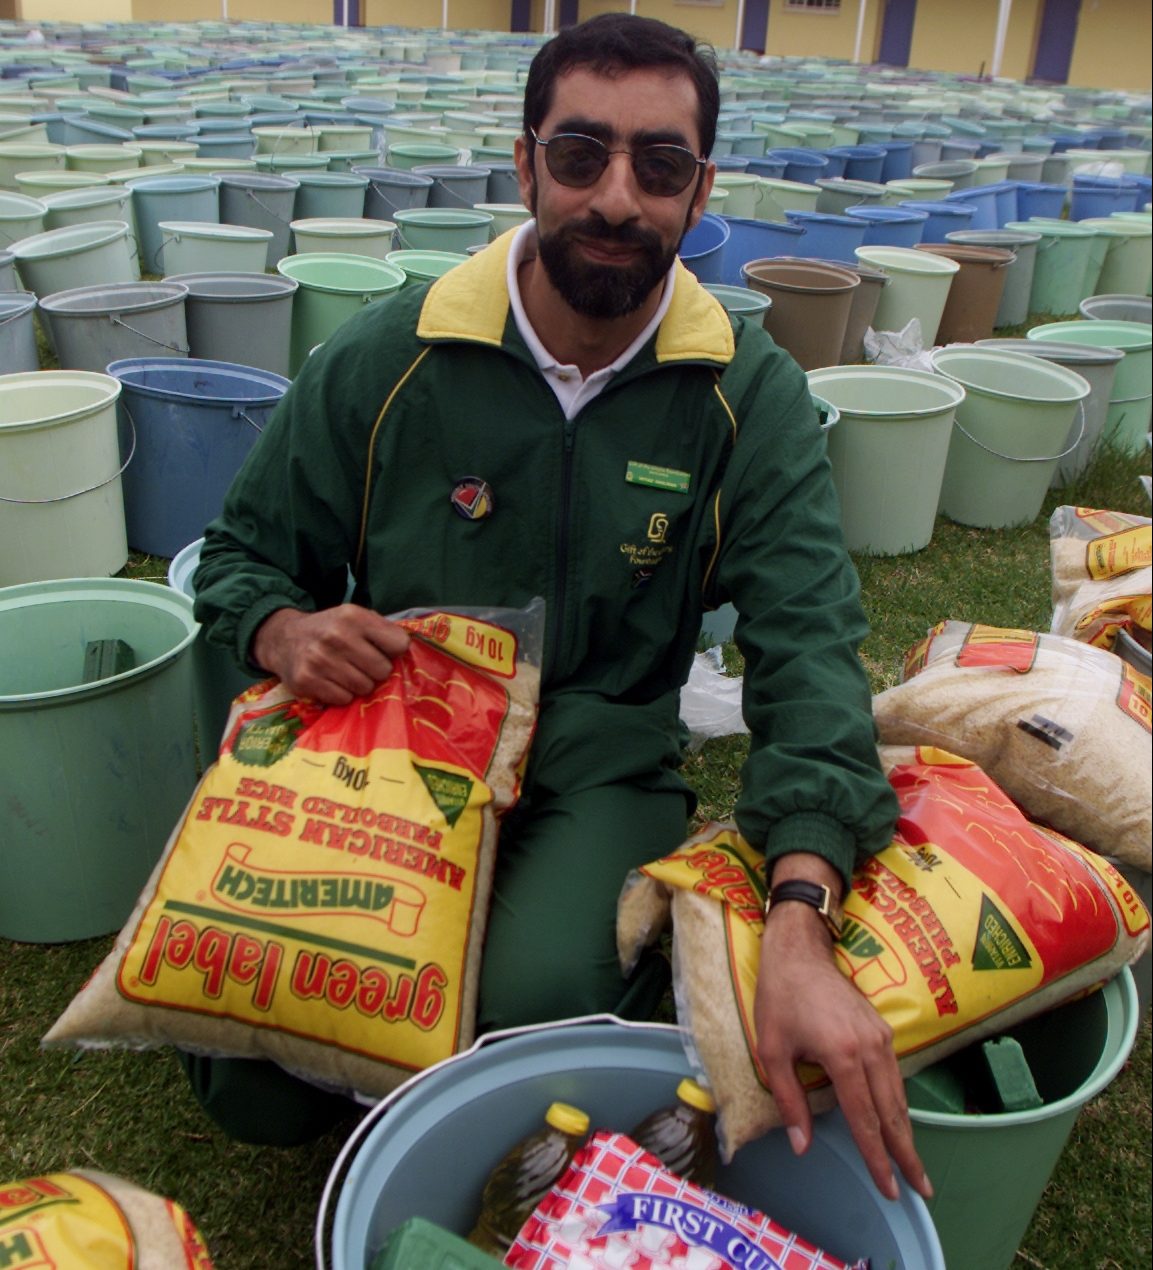 JOHANNESBURG, SOUTH AFRICA: Dr. Imtiaz Sooliman, Founder of Gift of the Givers foundation with a food hamper for the Poverty Alleviation Feast at Tabankulu in the starving and malnurished Eastern Cape on 29 November 2002. (Photo by Gallo Images / Sunday Times / Richard Shorey)